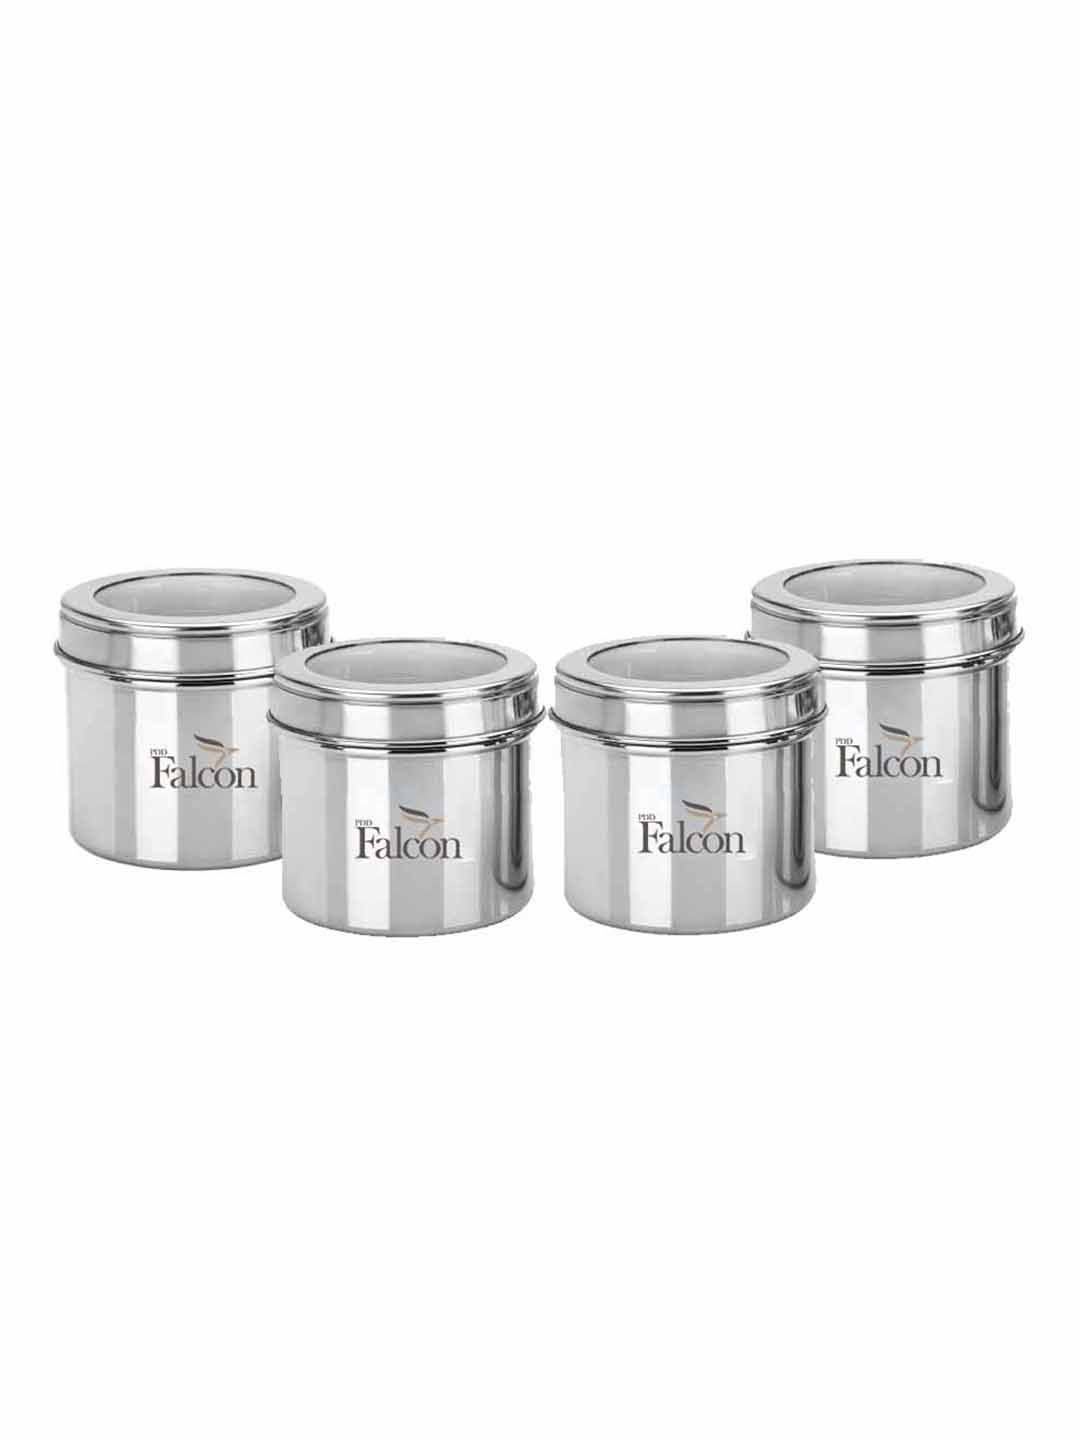 PDDFALCON Set Of 4 Silver-Toned Solid Kitchen Storage Canisters Price in India